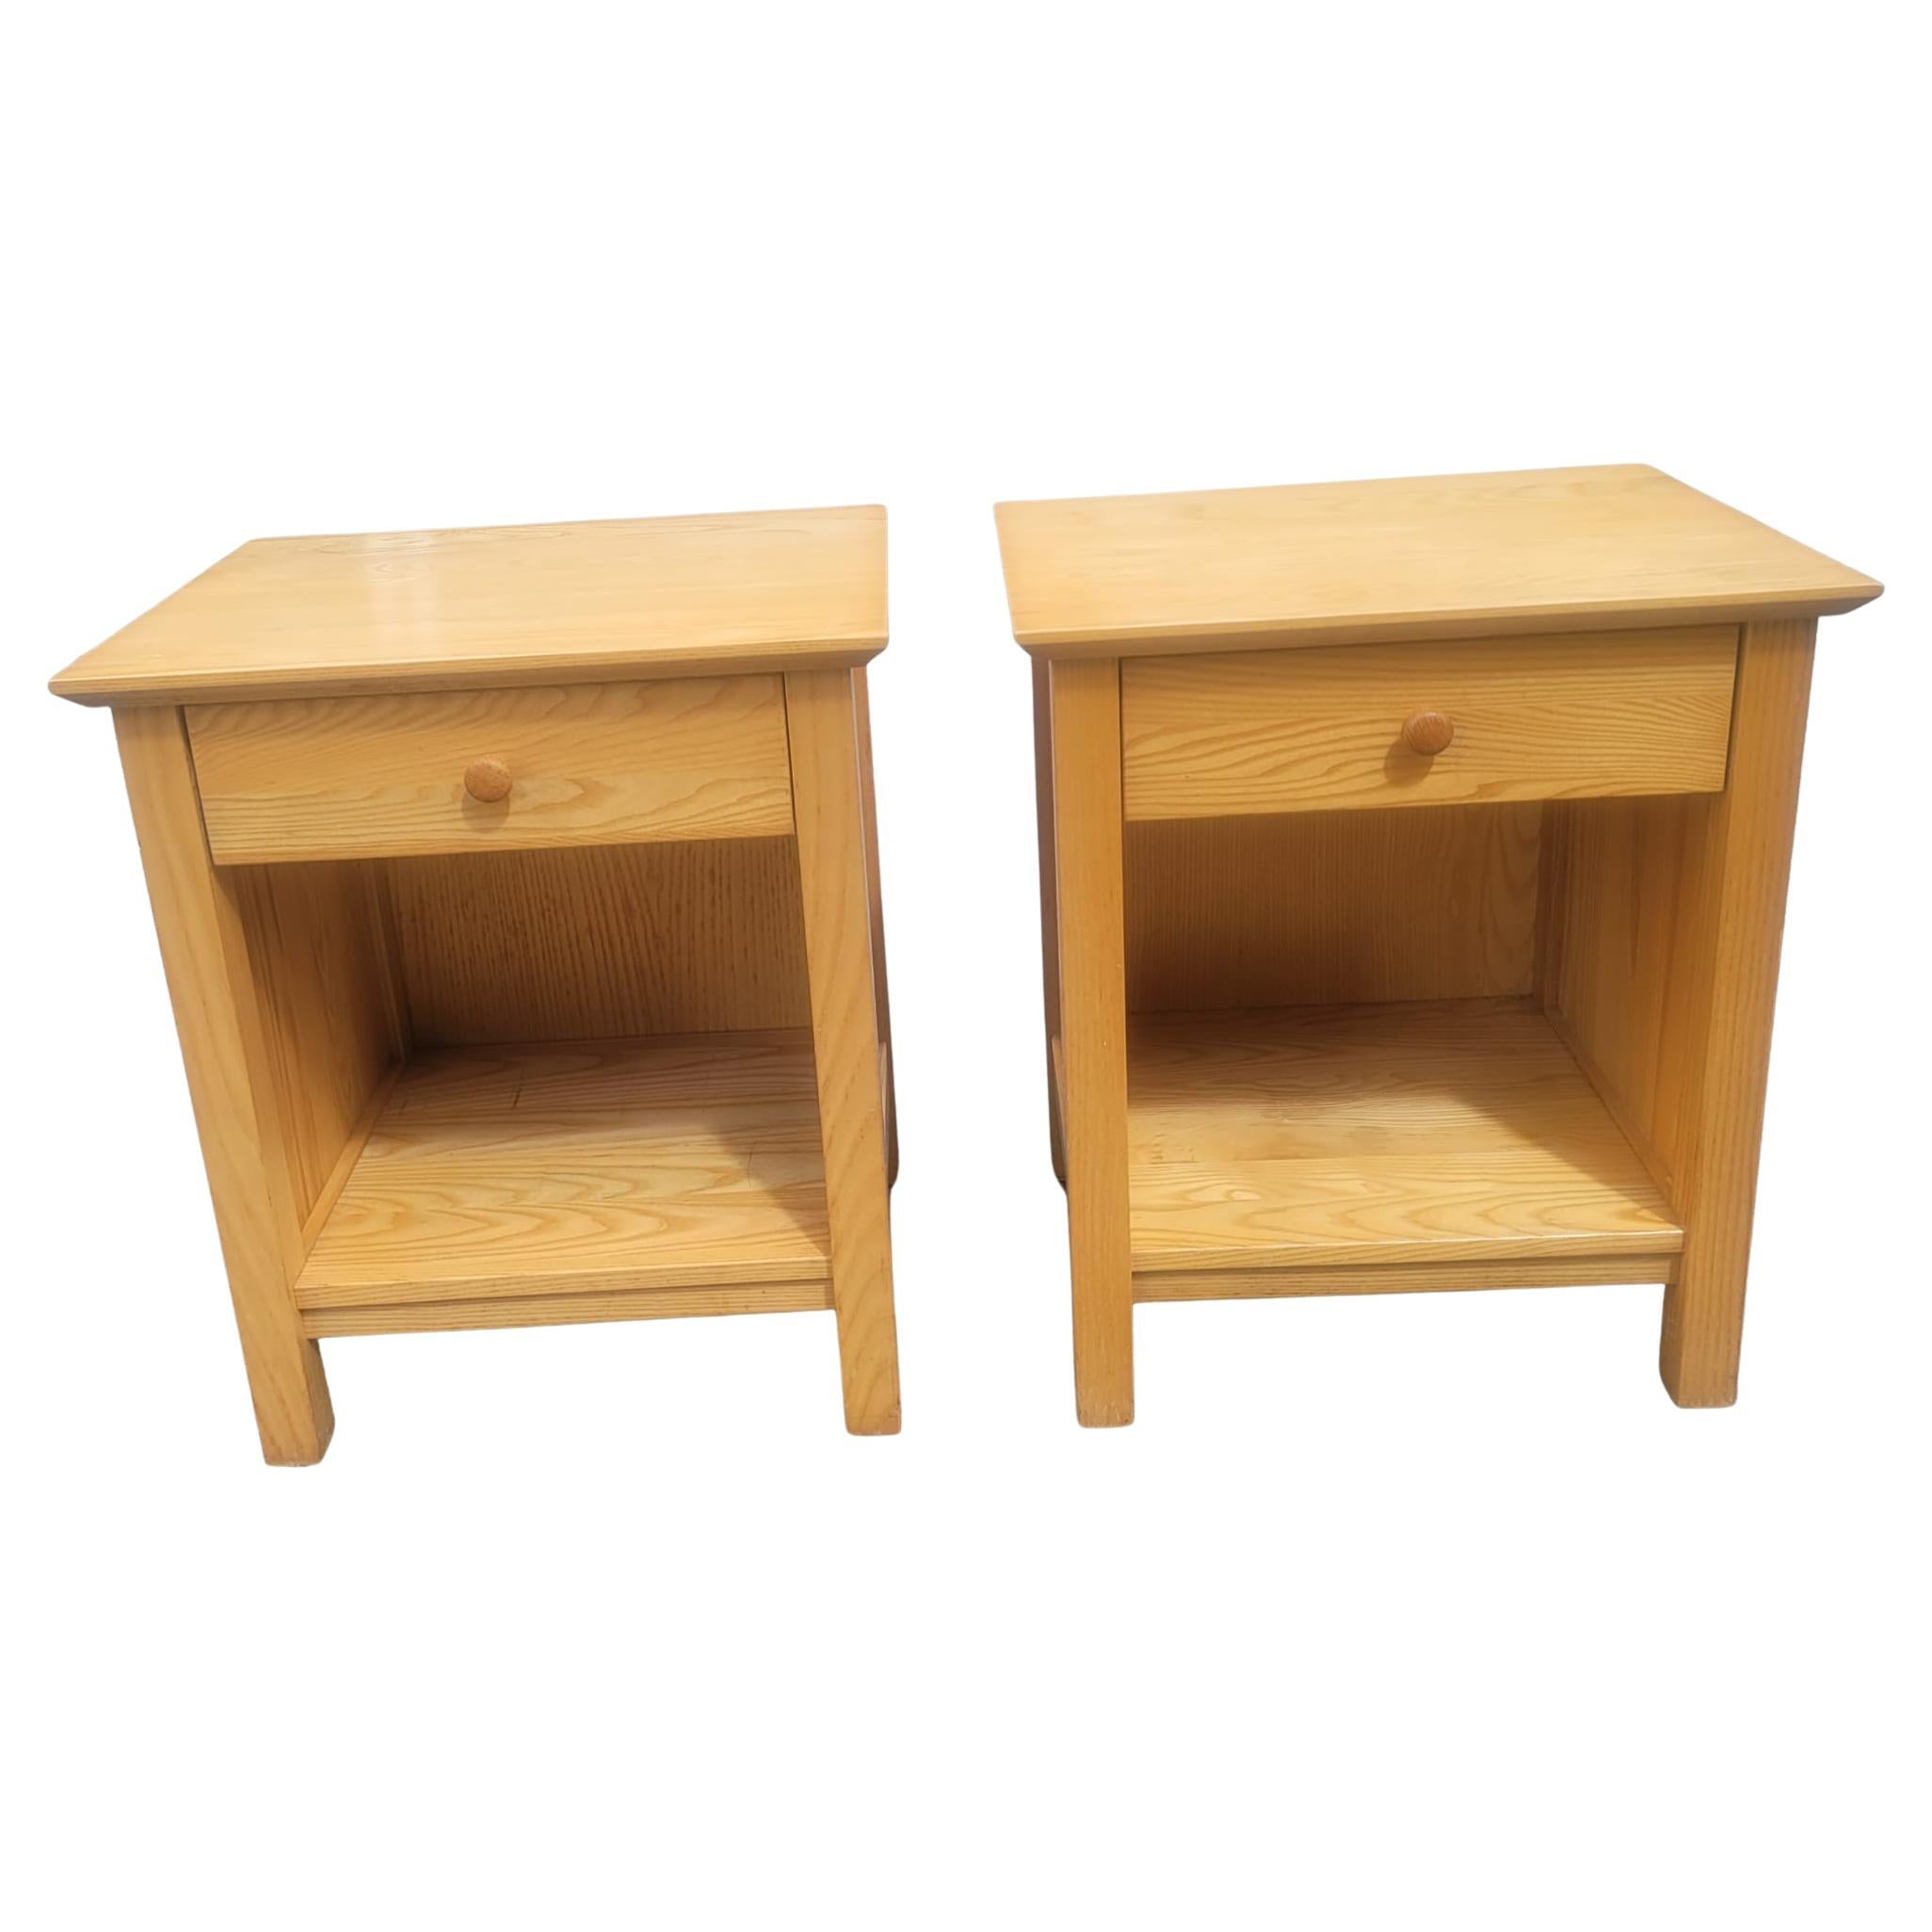 Woodwork Vermont Tubbs Solid Ash Wood Single Drawer Bedside Tables Nightstands, a Pair